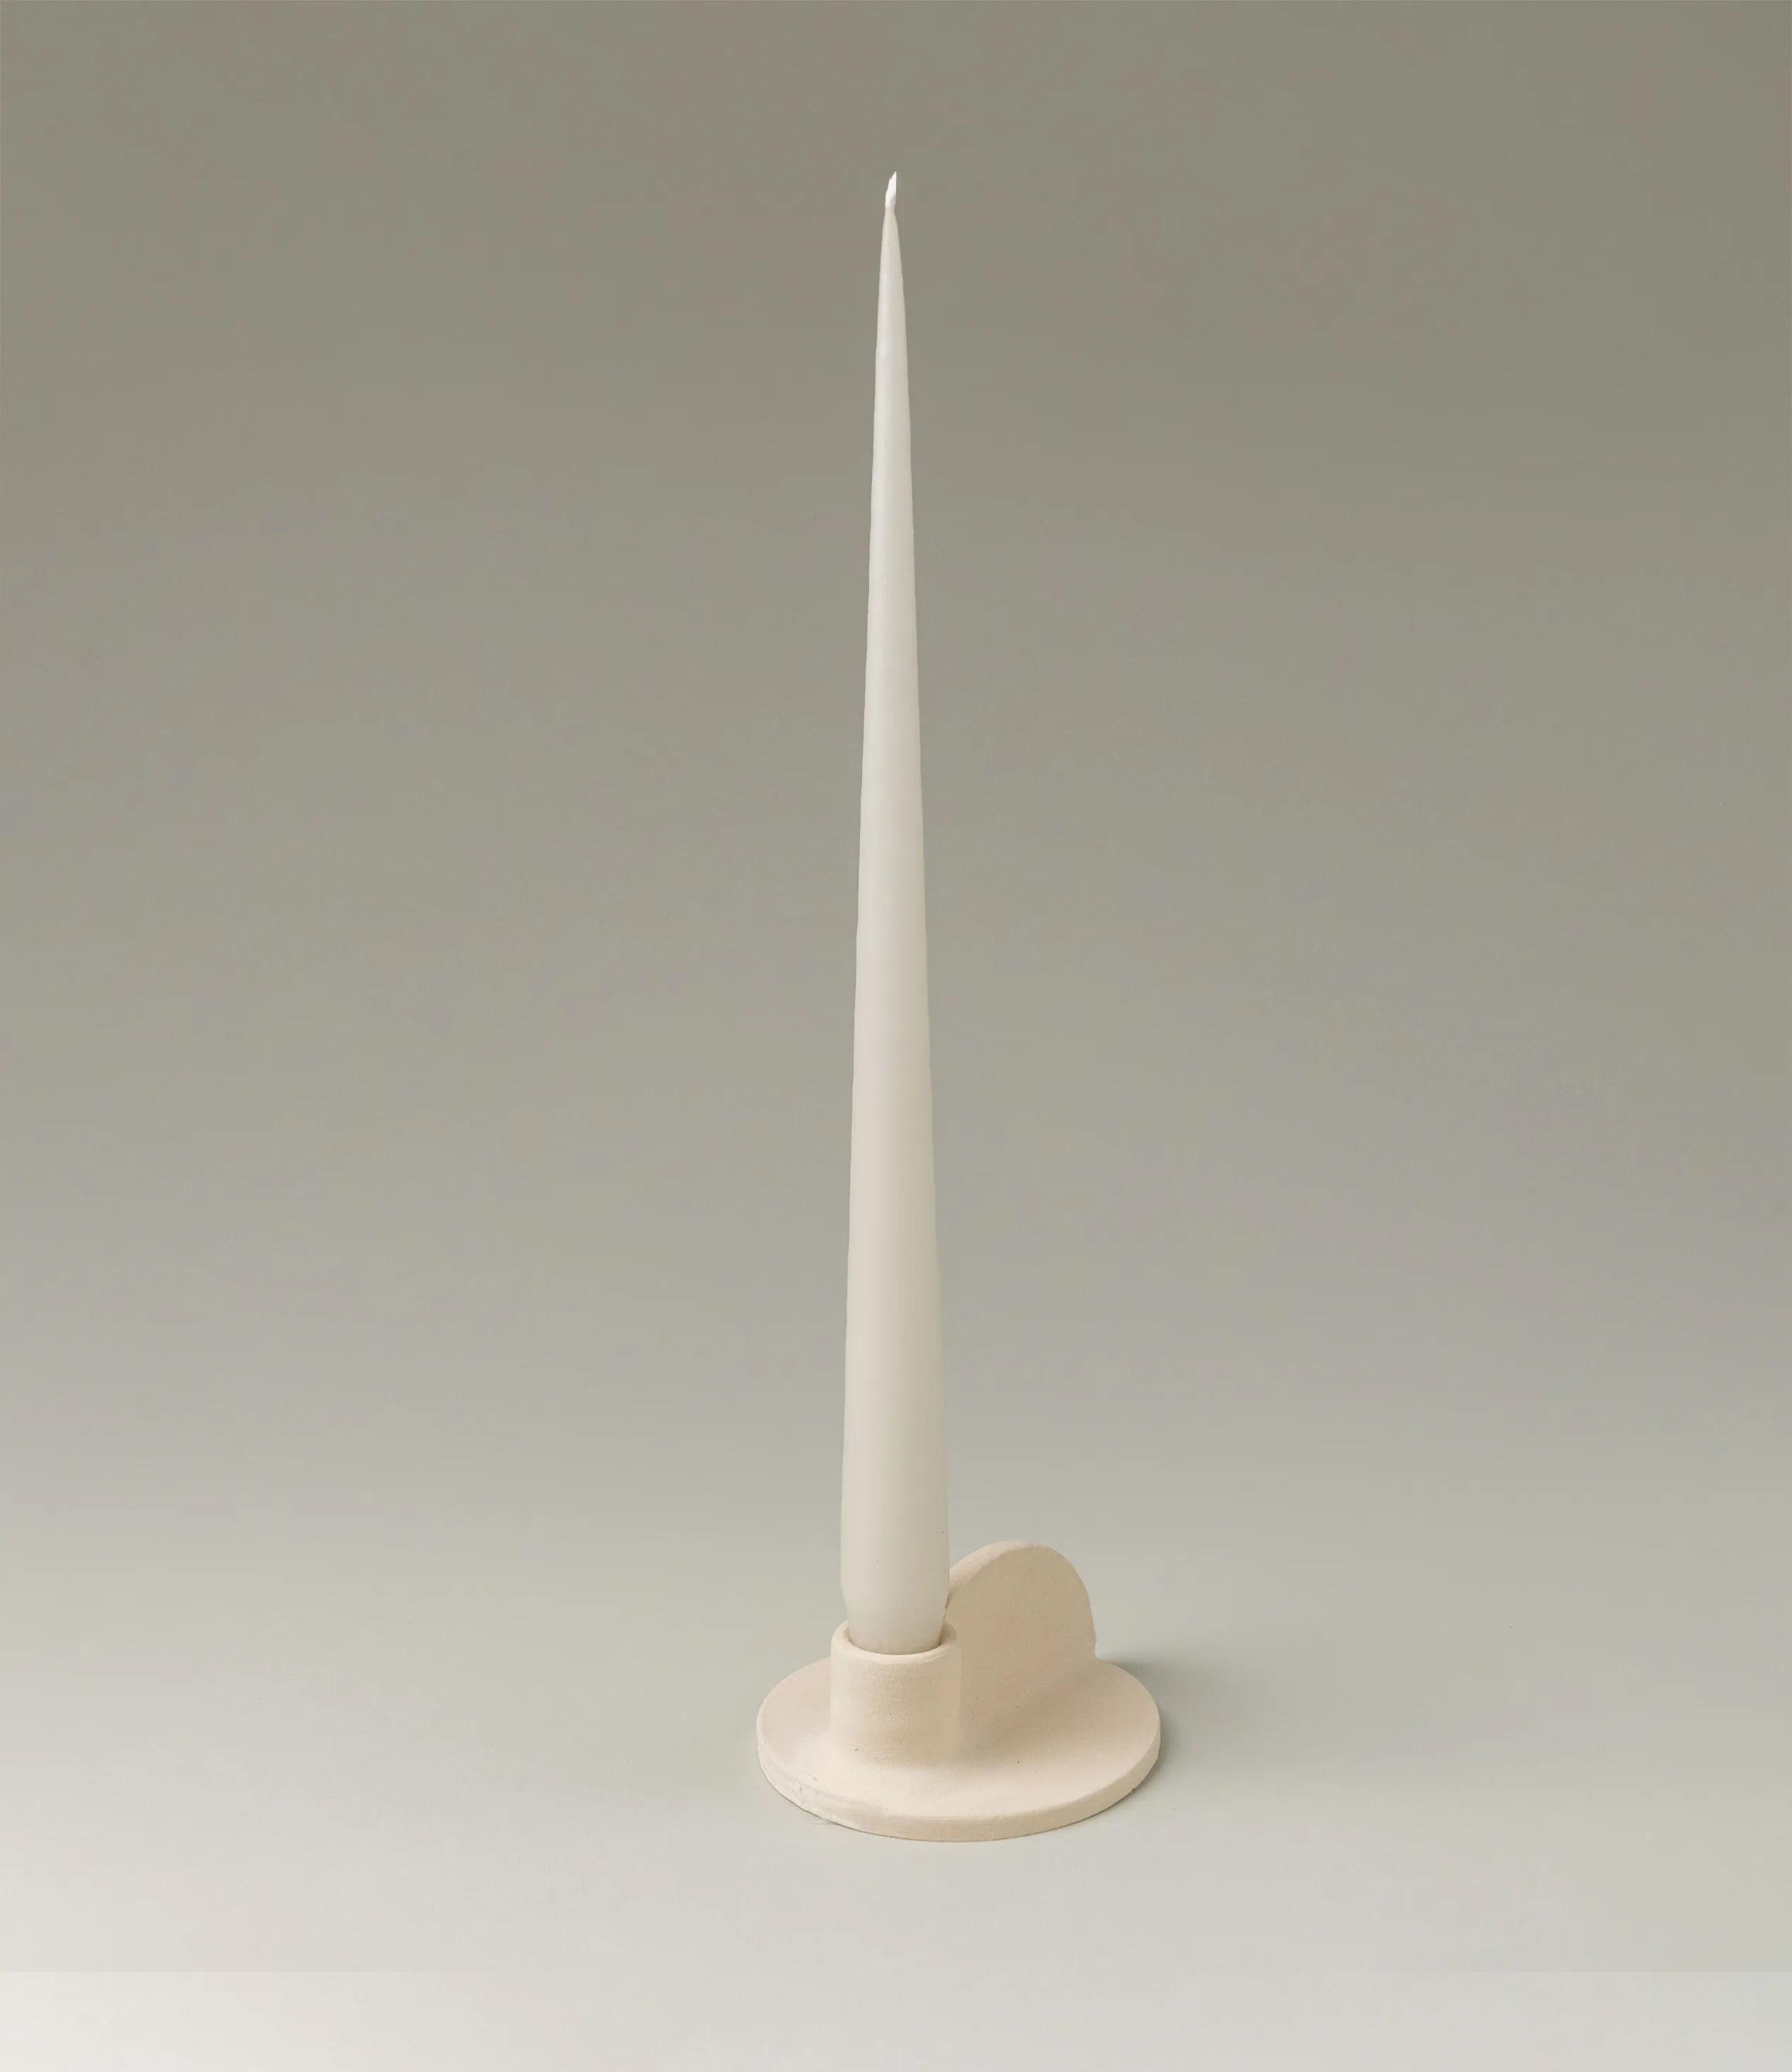 Ester&Erik Taper Candle coming in an an ivory shade. The product is showcased in Myrtha Candleholder from Alfareria La Nava. The subtle withe color fits perfectly the natural shade of the candleholder.